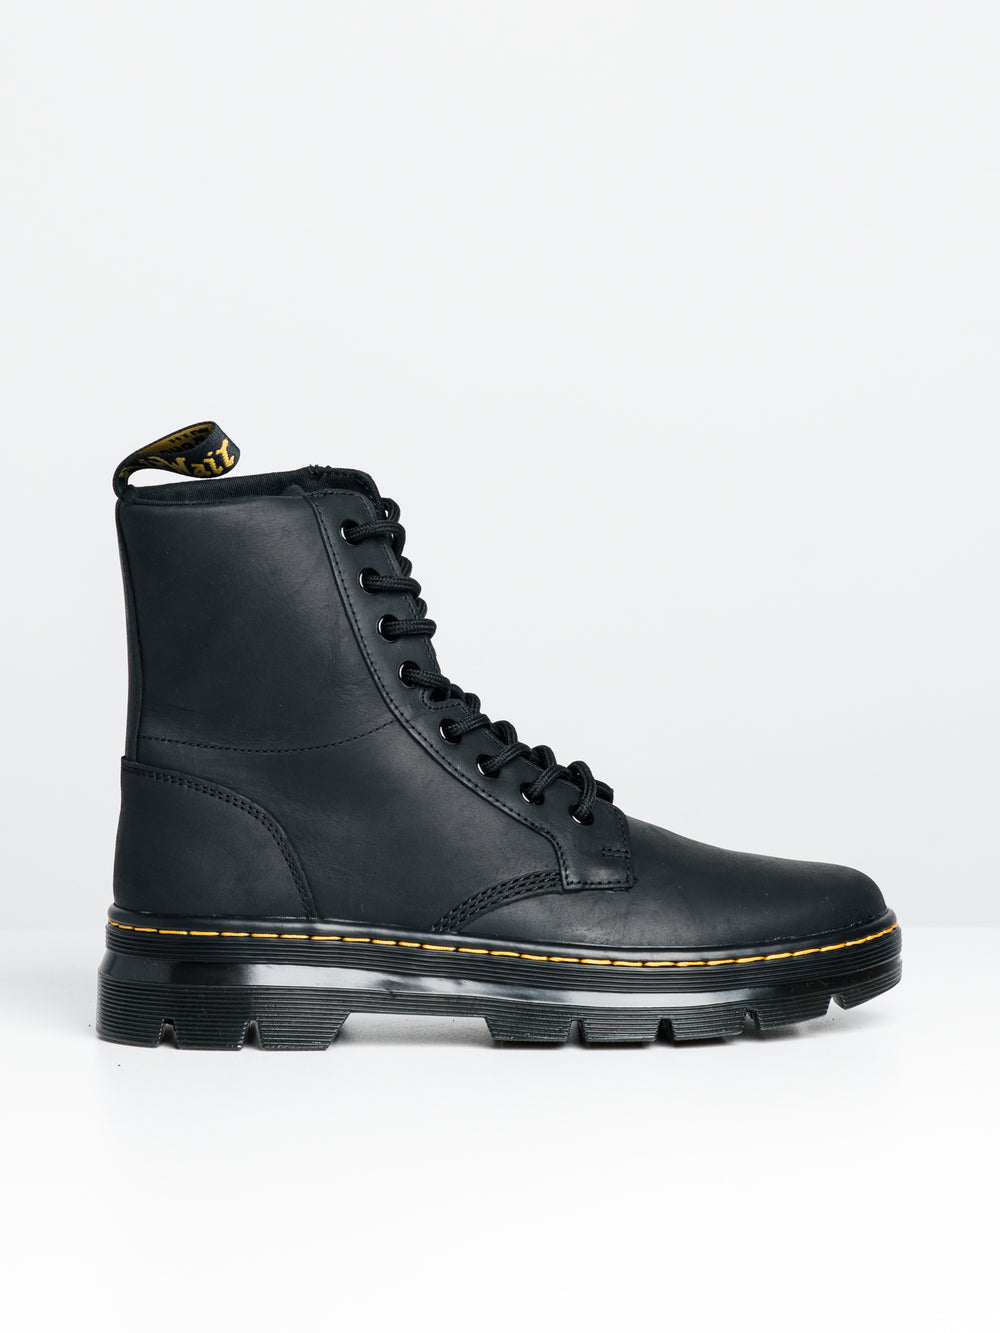 DR MARTENS COMBS LEATHER WYOMING BOOT